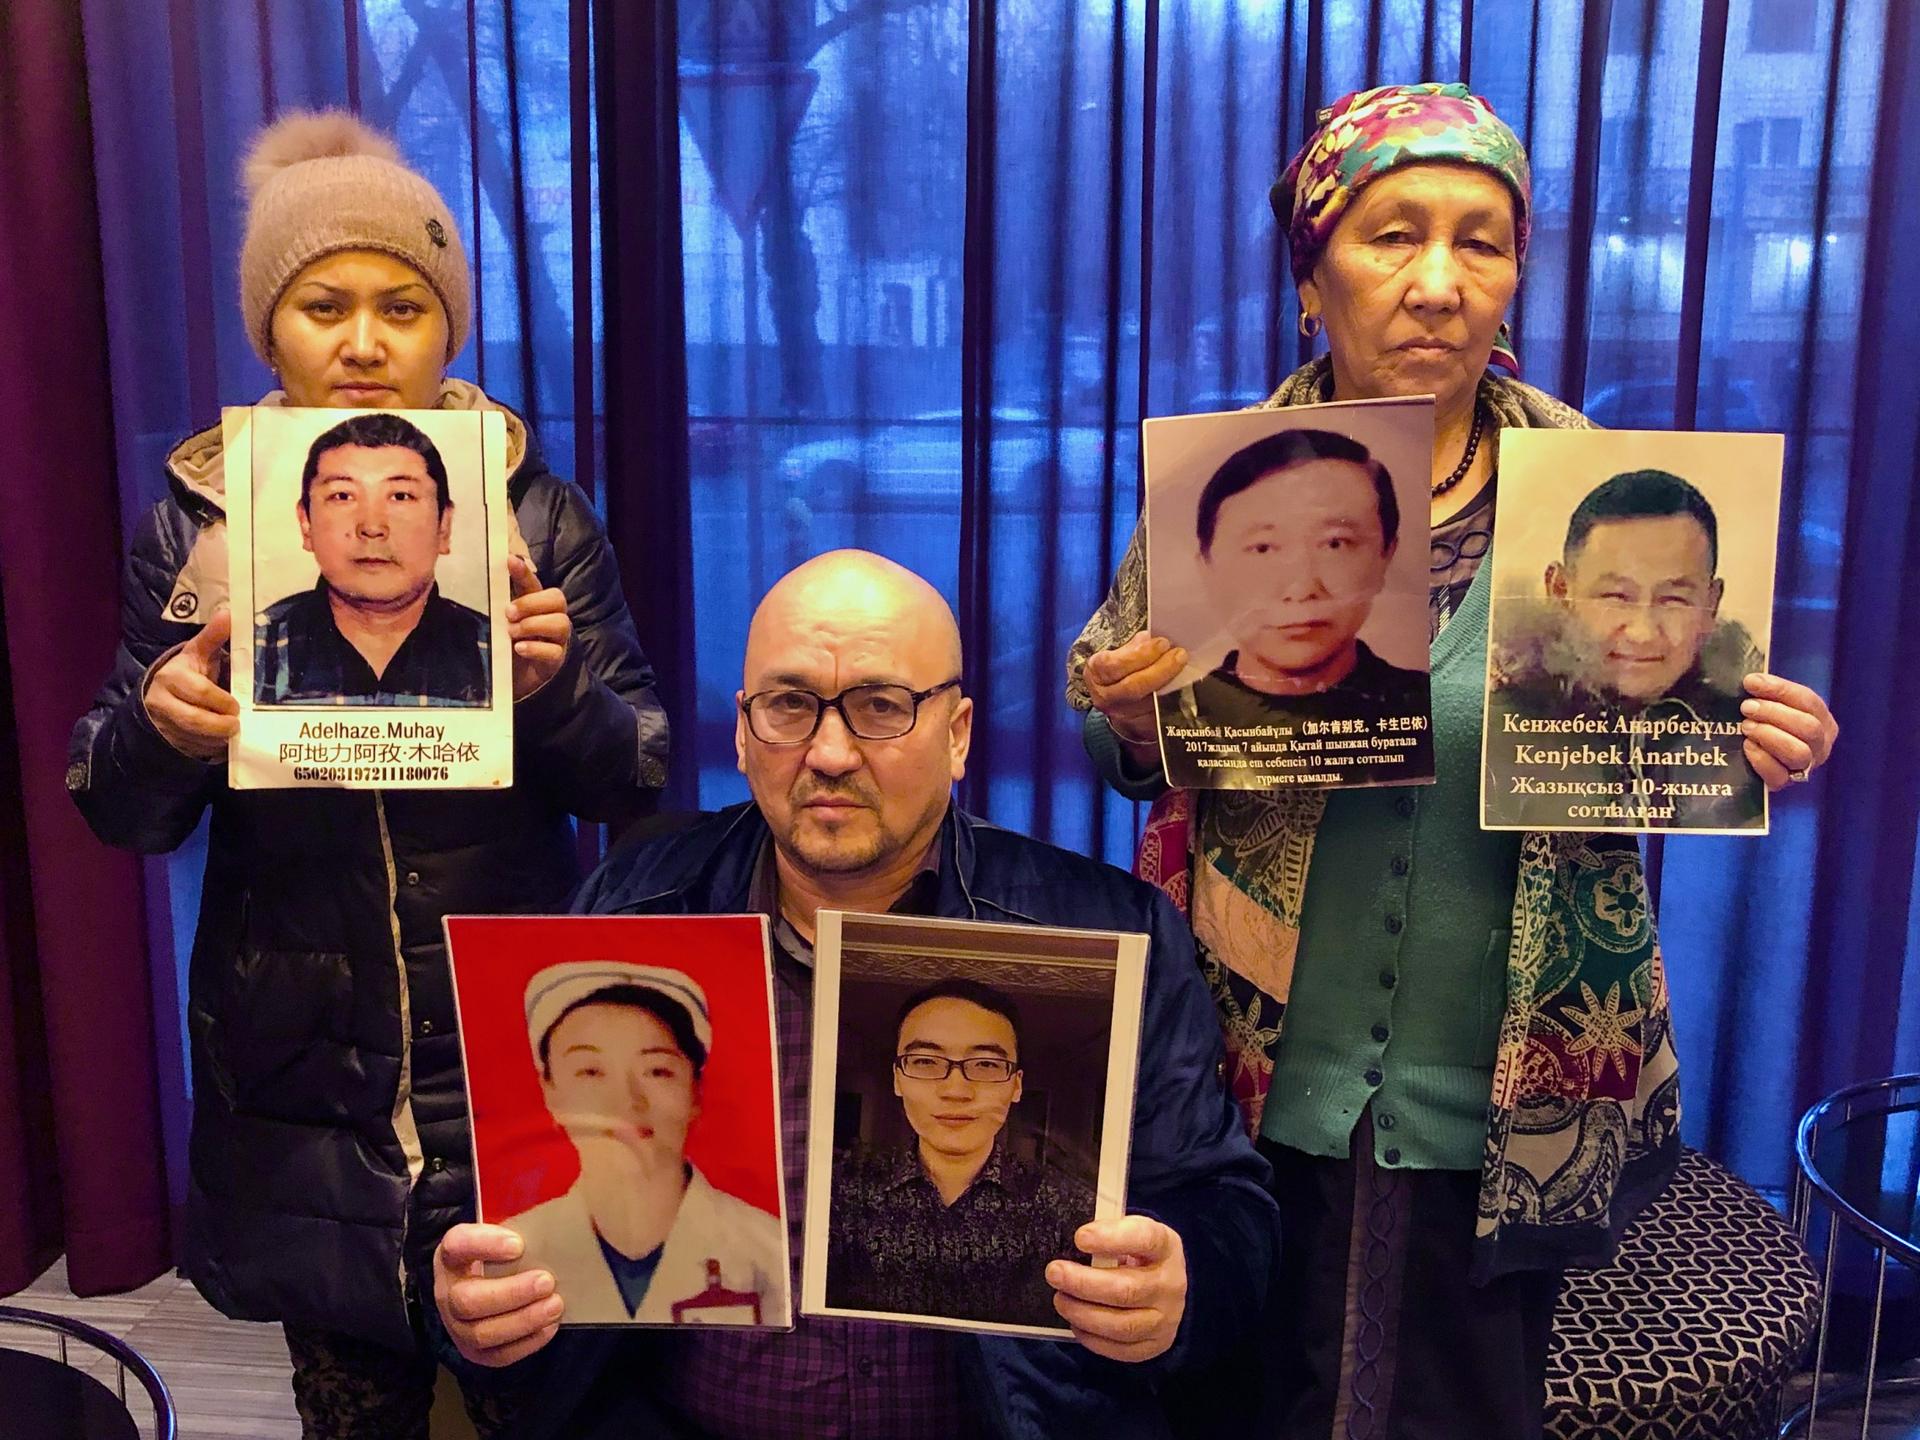 Kazakhs in Almaty hold up photos of their relatives being held in detention in Xinjiang, China.